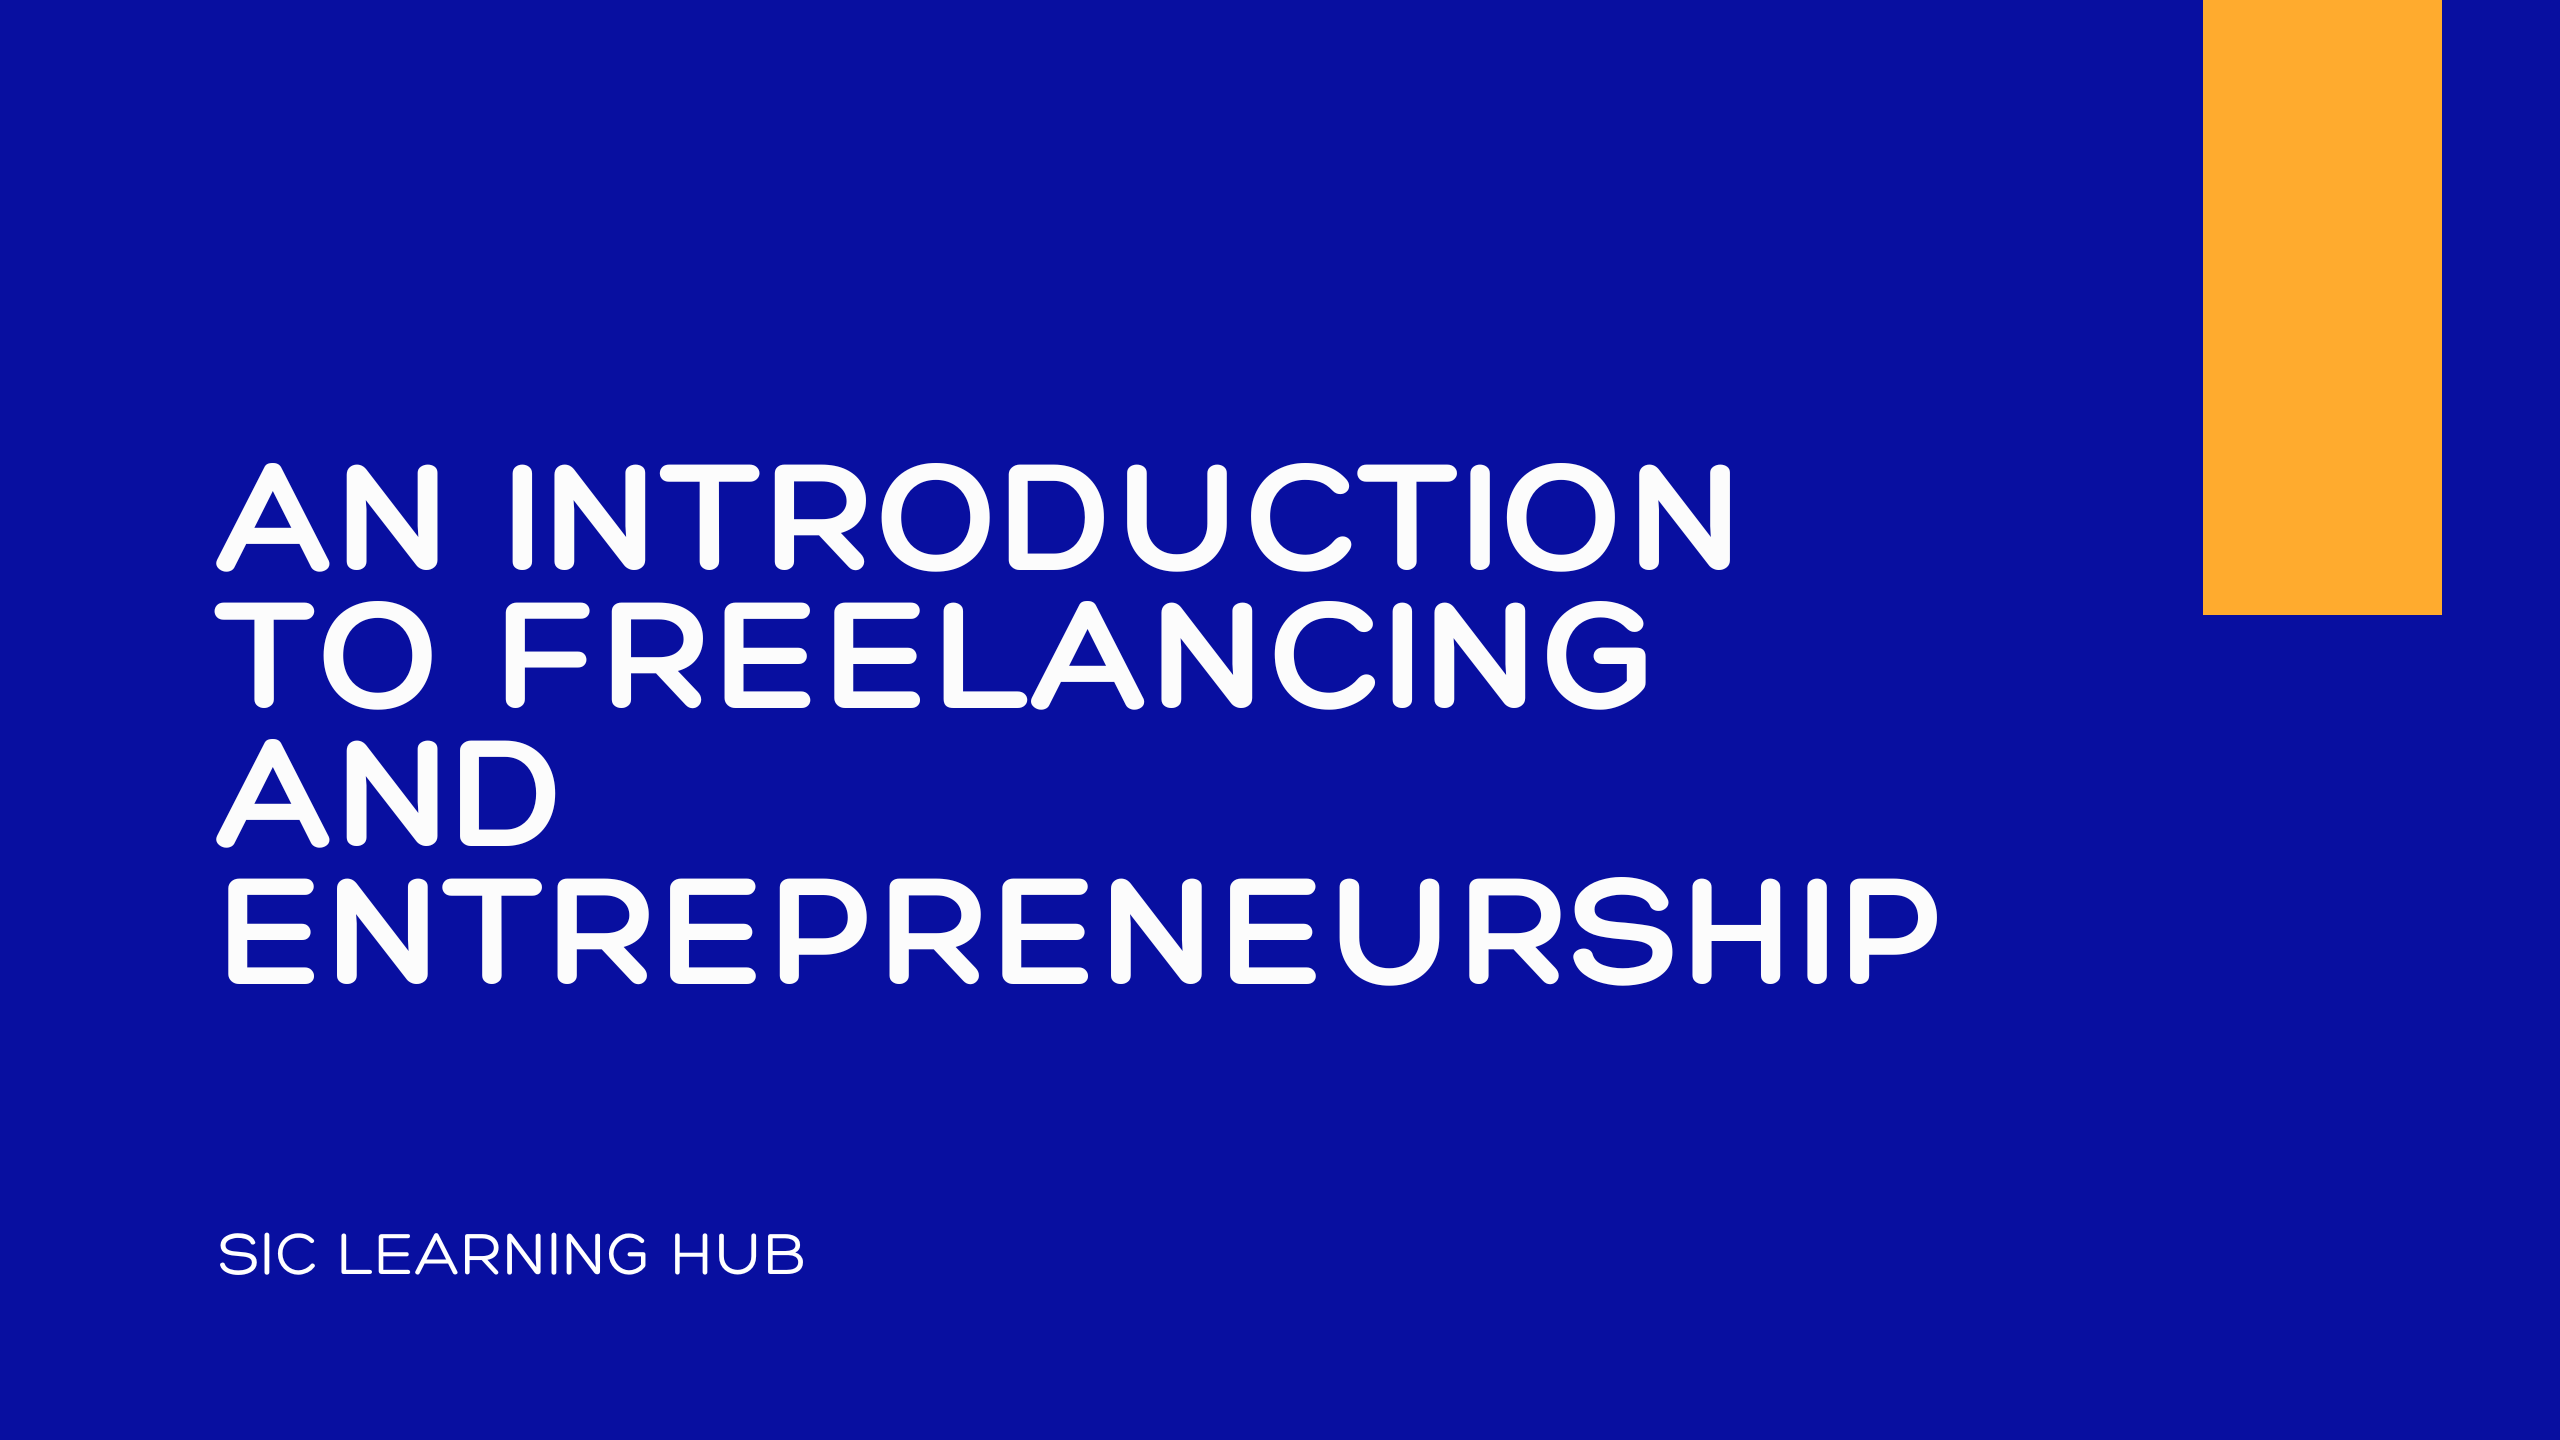 An Introduction to Freelancing and Entrepreneurship